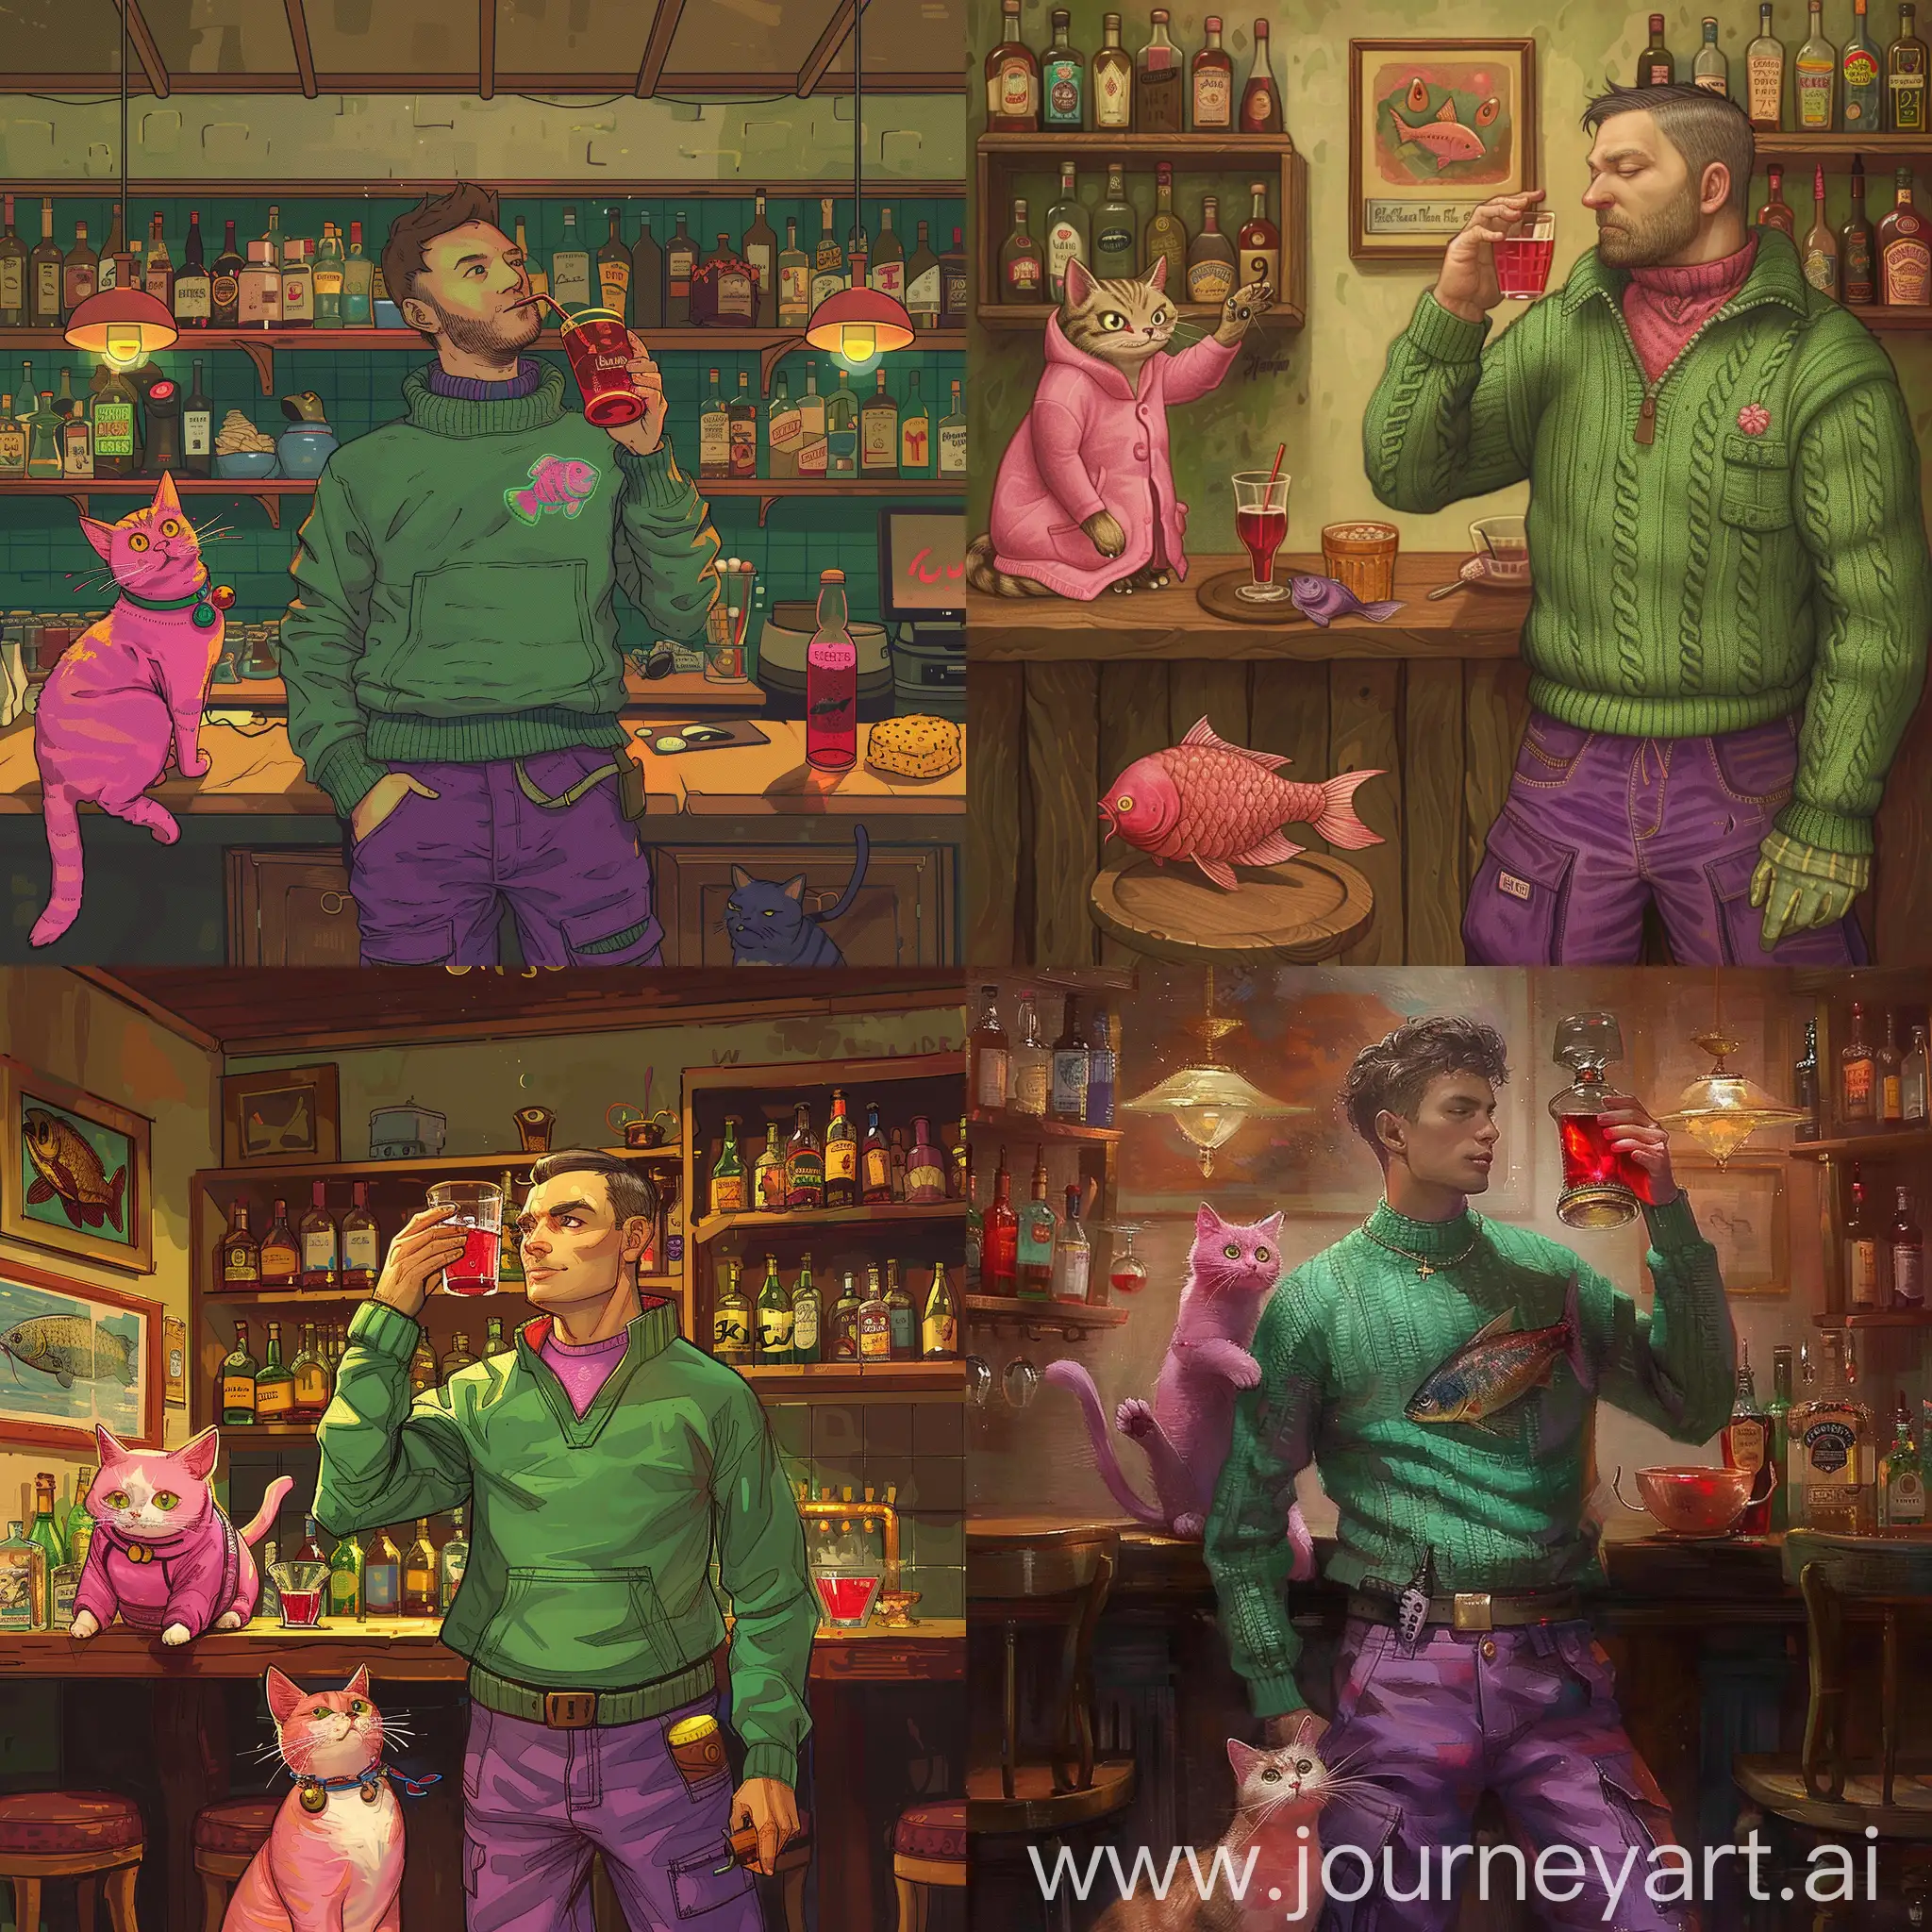 A man with a cat the clothes cat are pink fish and kitti the clothes man are  green sweater and purple cargo and the man drinka a alkol the color alkol is red in the bar